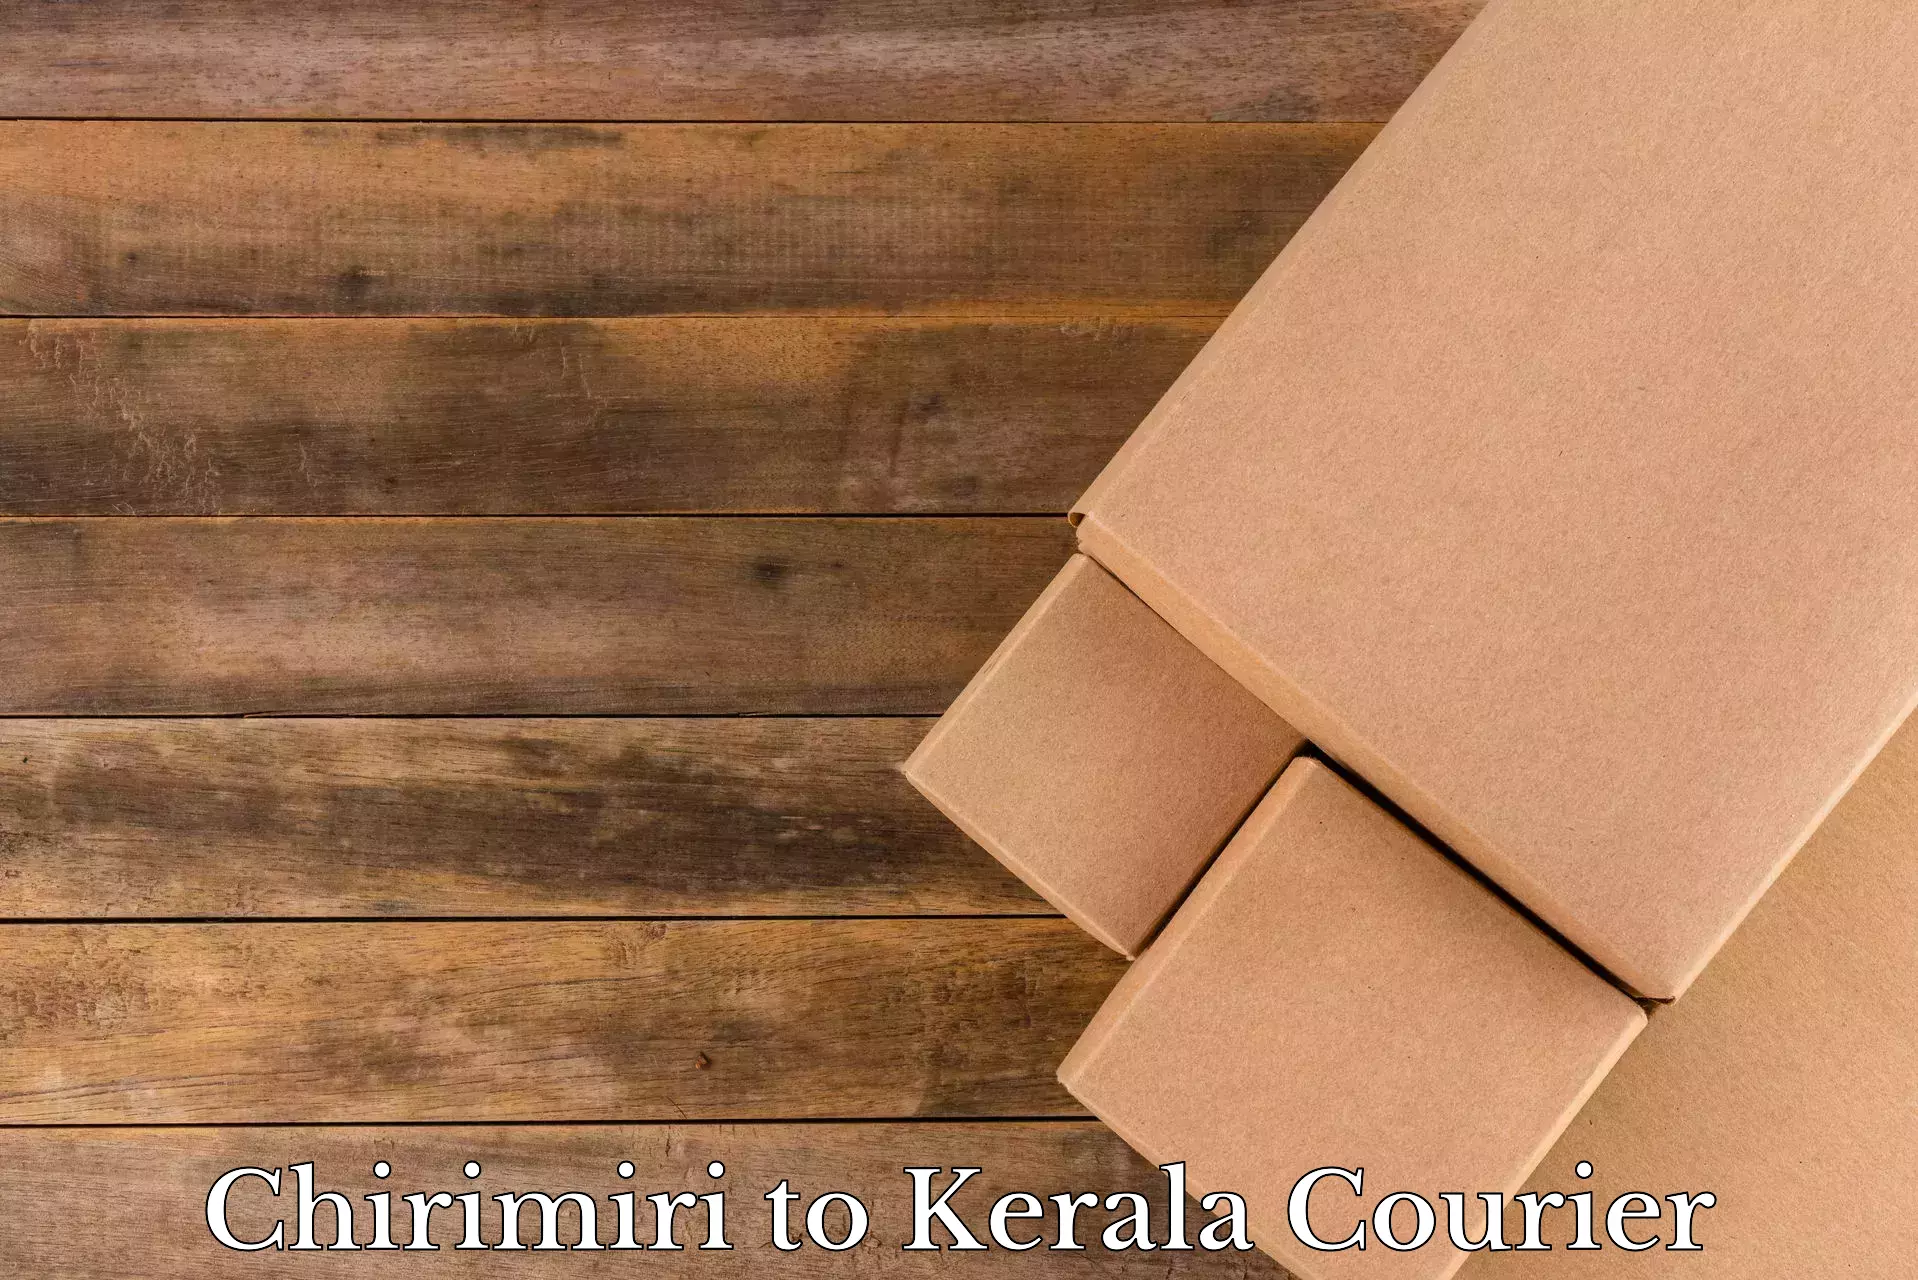 Trusted relocation experts Chirimiri to Kerala